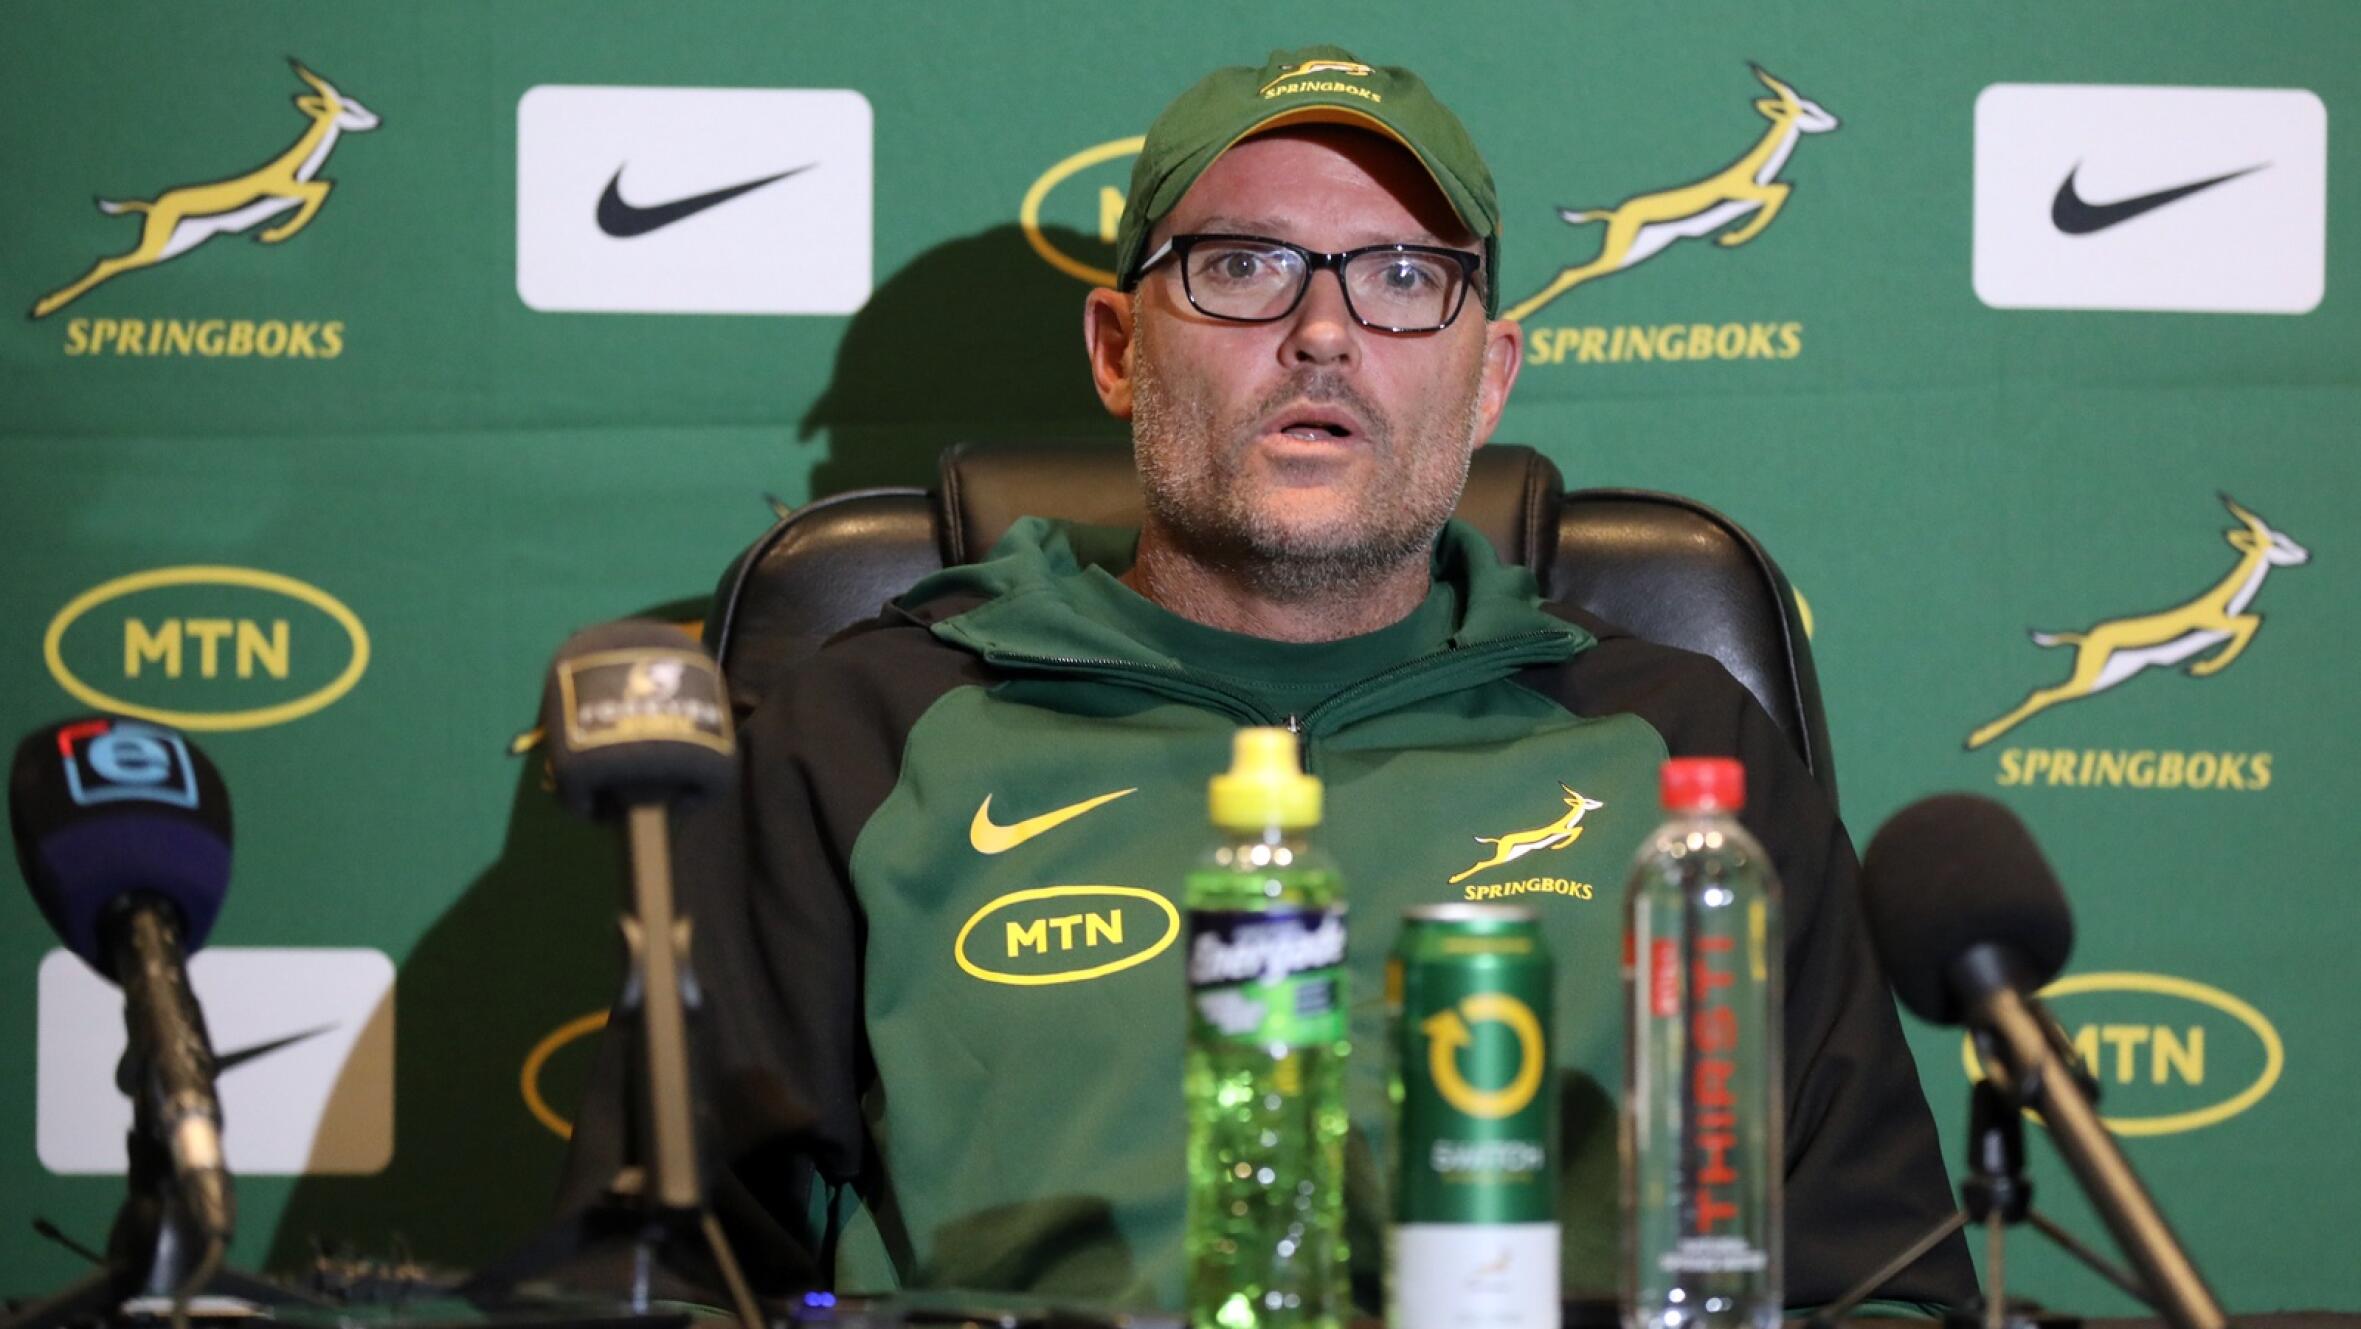 Springbok head coach Jacques Nienaber speaks to the media during a press conference ahead of next week's Rugby Championship clash against Argentina